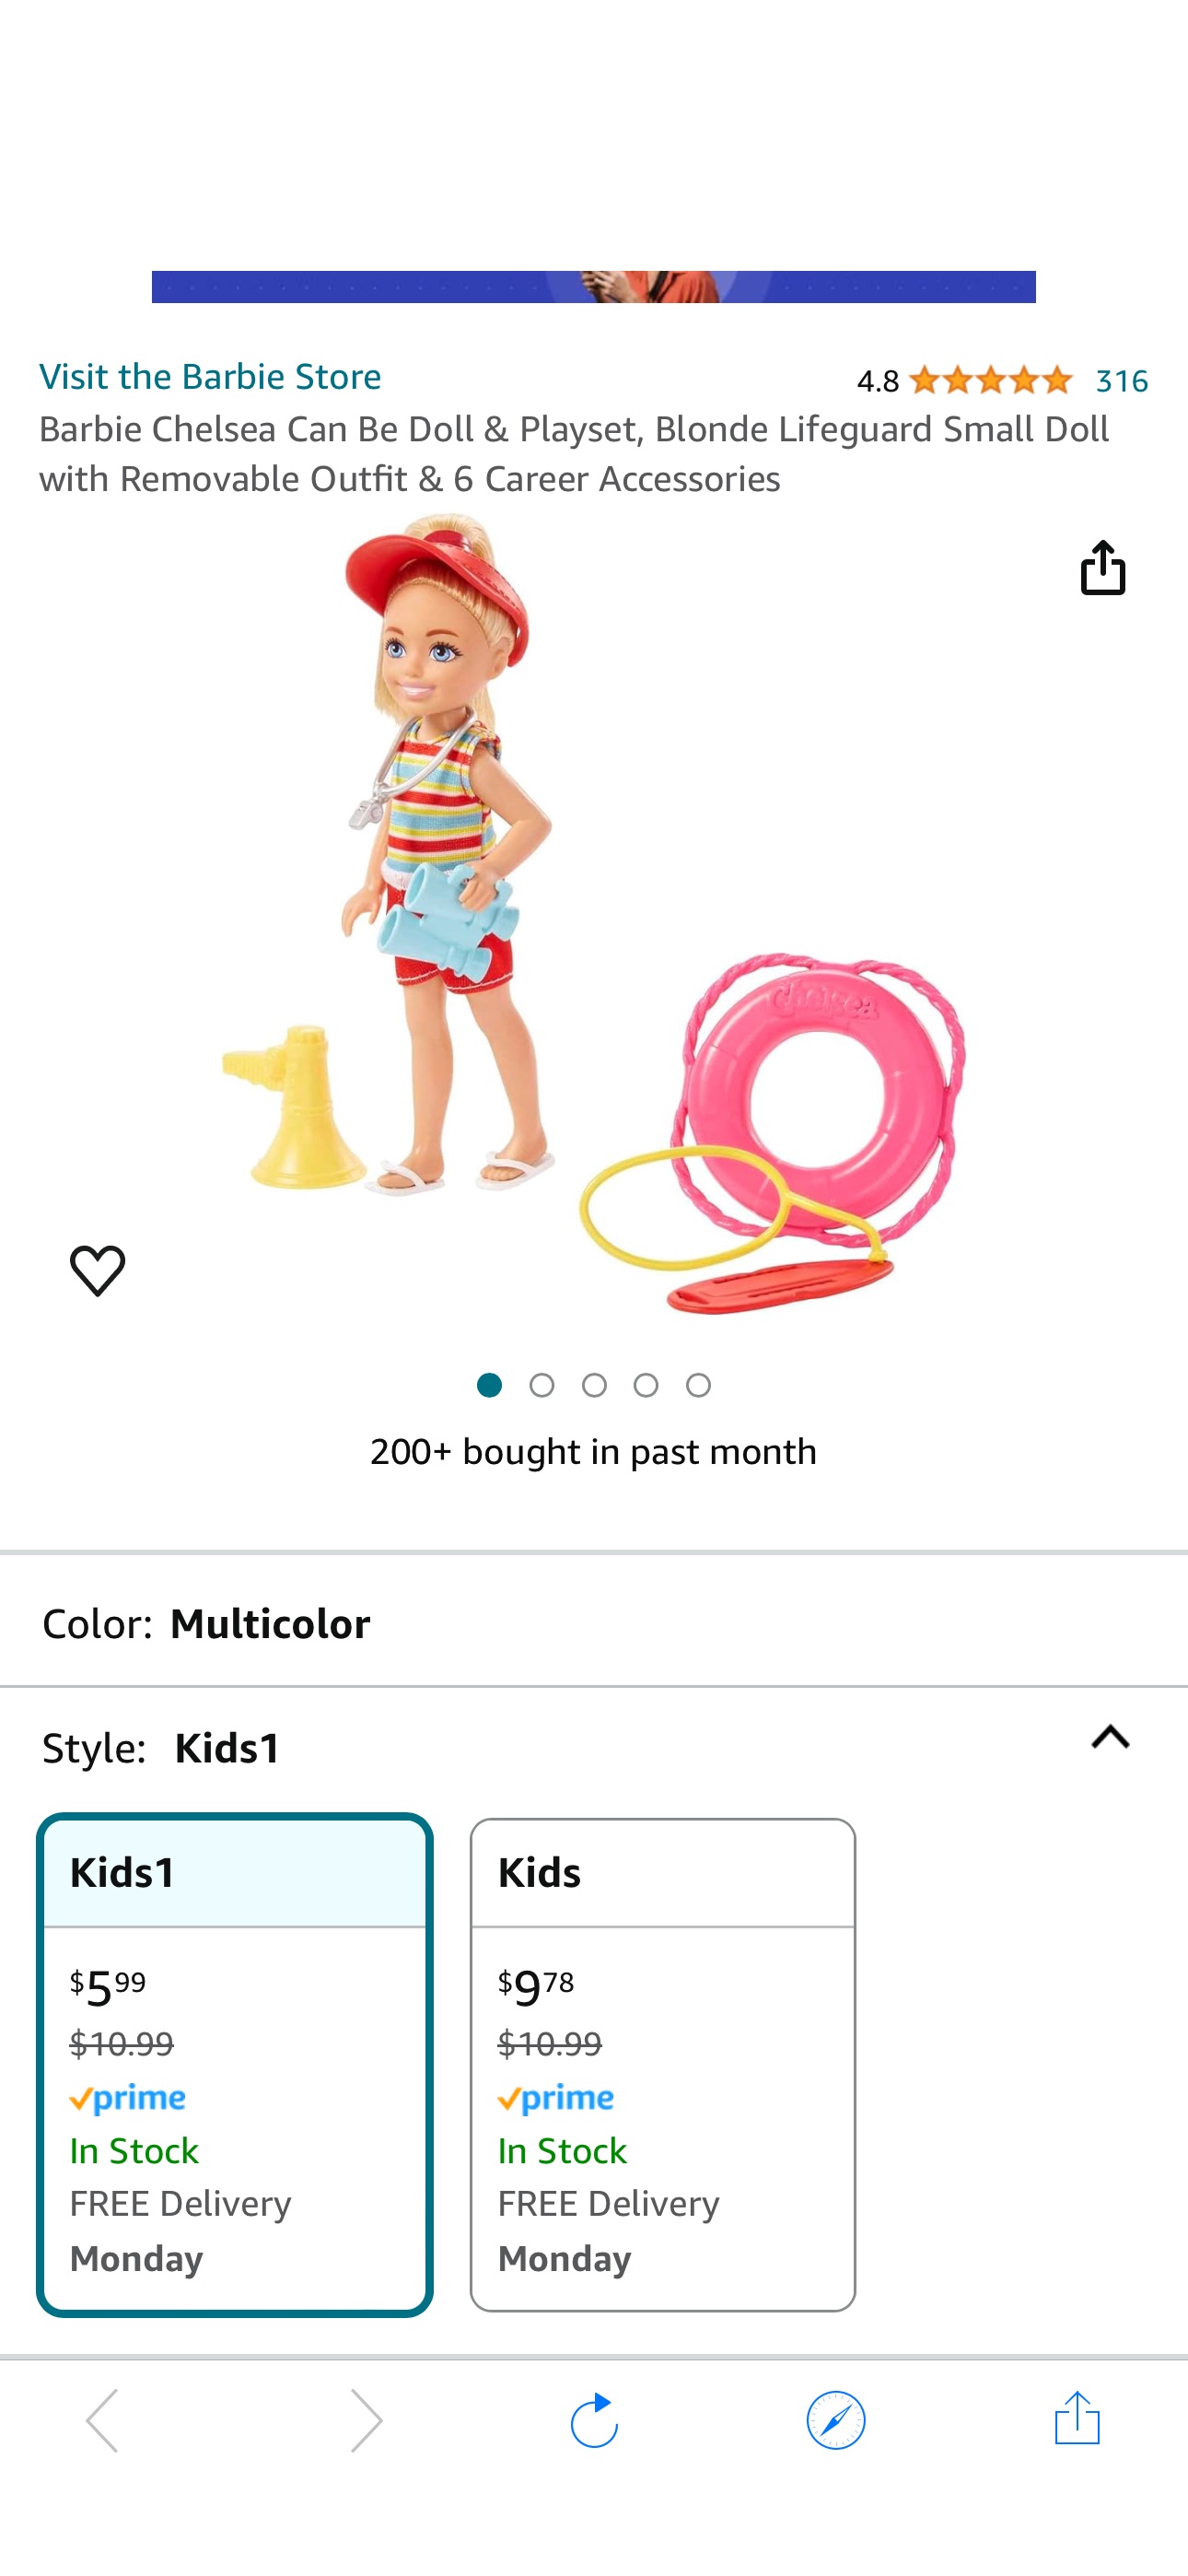 Amazon.com: Barbie Chelsea Can Be Doll & Playset, Blonde Lifeguard Small Doll with Removable Outfit & 6 Career Accessories : Toys & Games